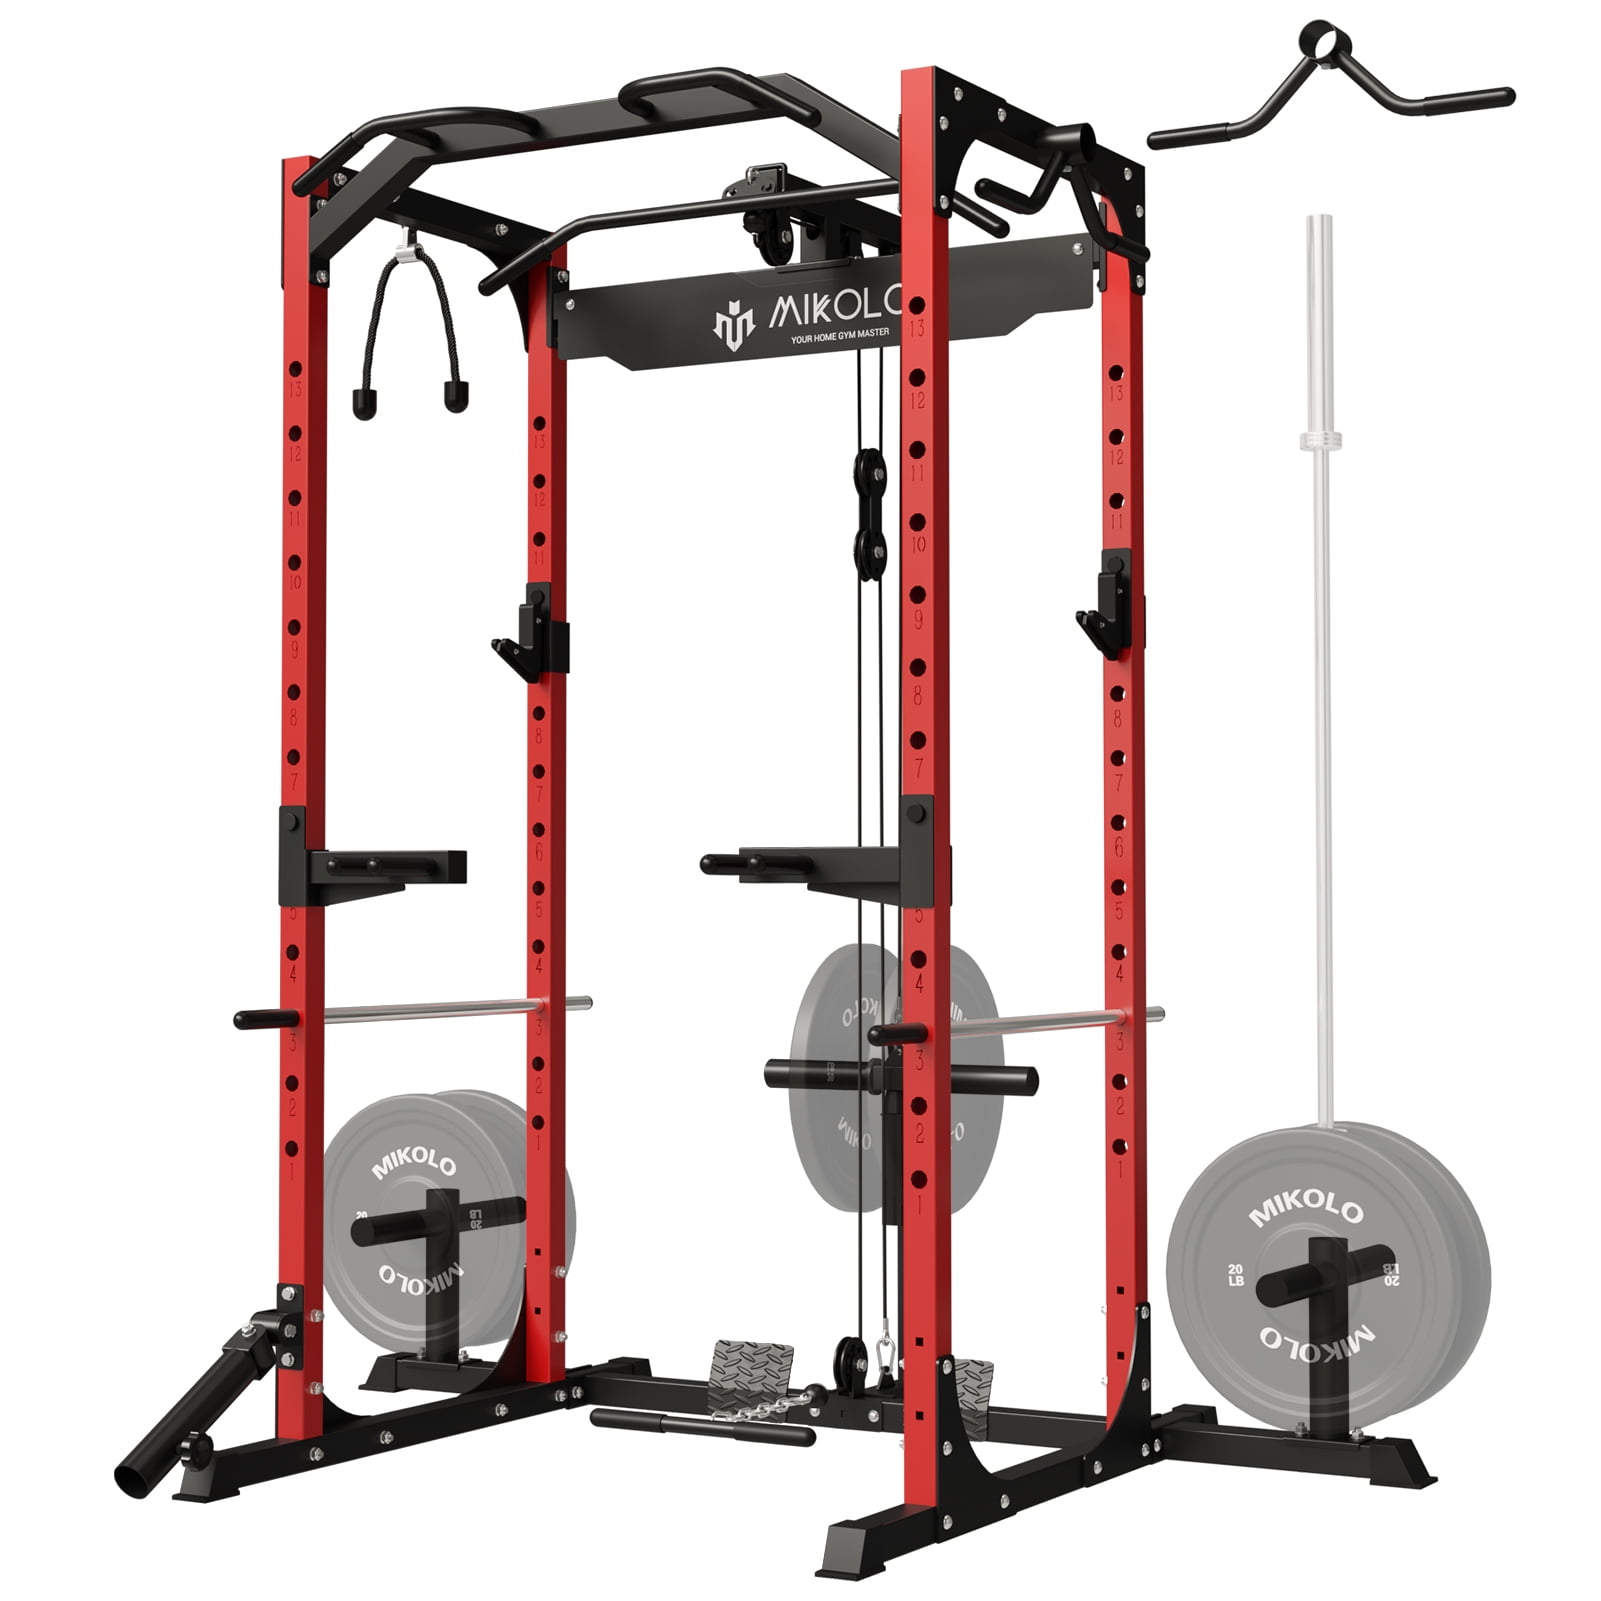 Mikolo Power Rack Cage with LAT Pulldown System,1200LBS Capacity Power Rack, Multi-Functional Squat Rack with 13-Level Adjustable Height and Dip Bars, T-Bar, Gym Equipment (Upgraded) - Walmart.com